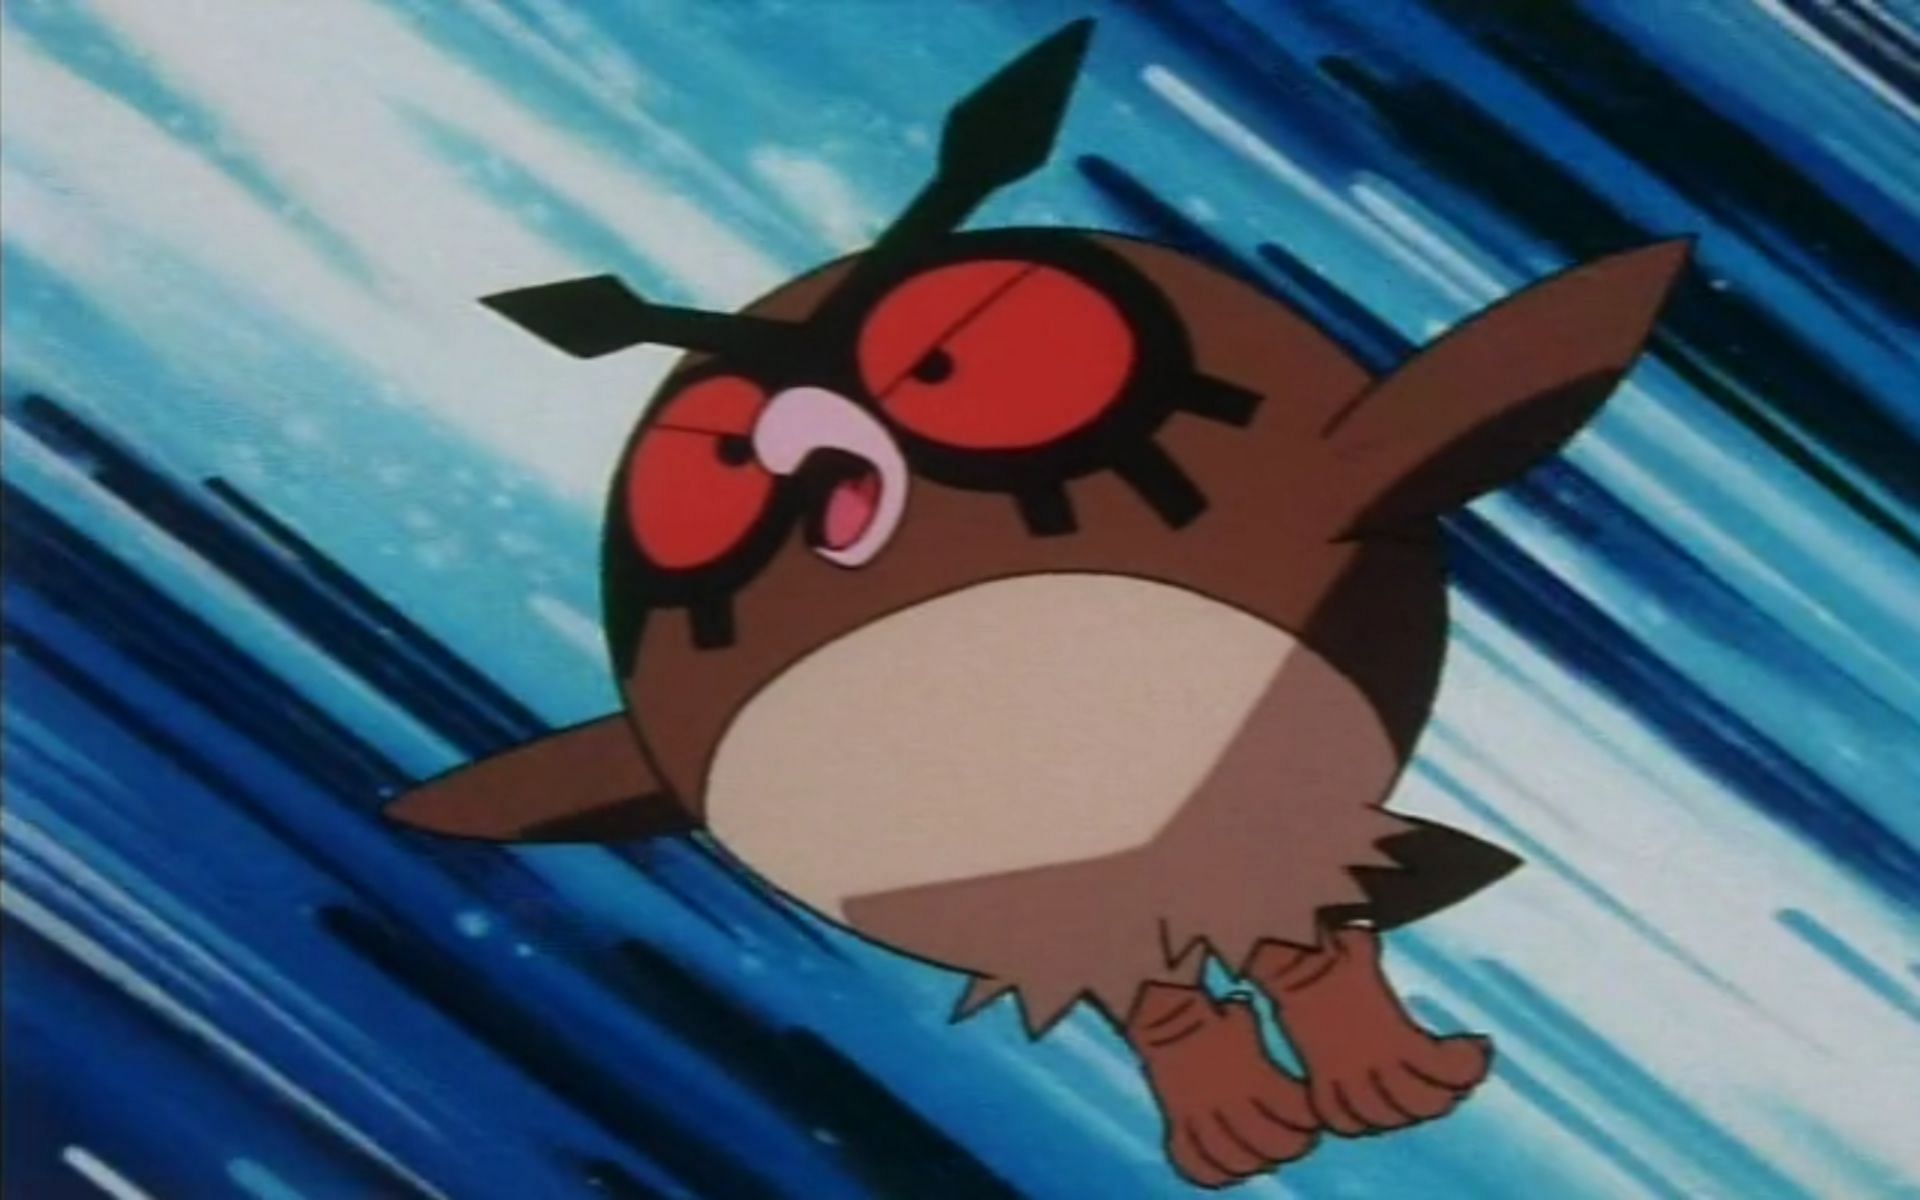 Hoothoot is one of the early game Pokemon from Generation II (Image via The Pokemon Company)